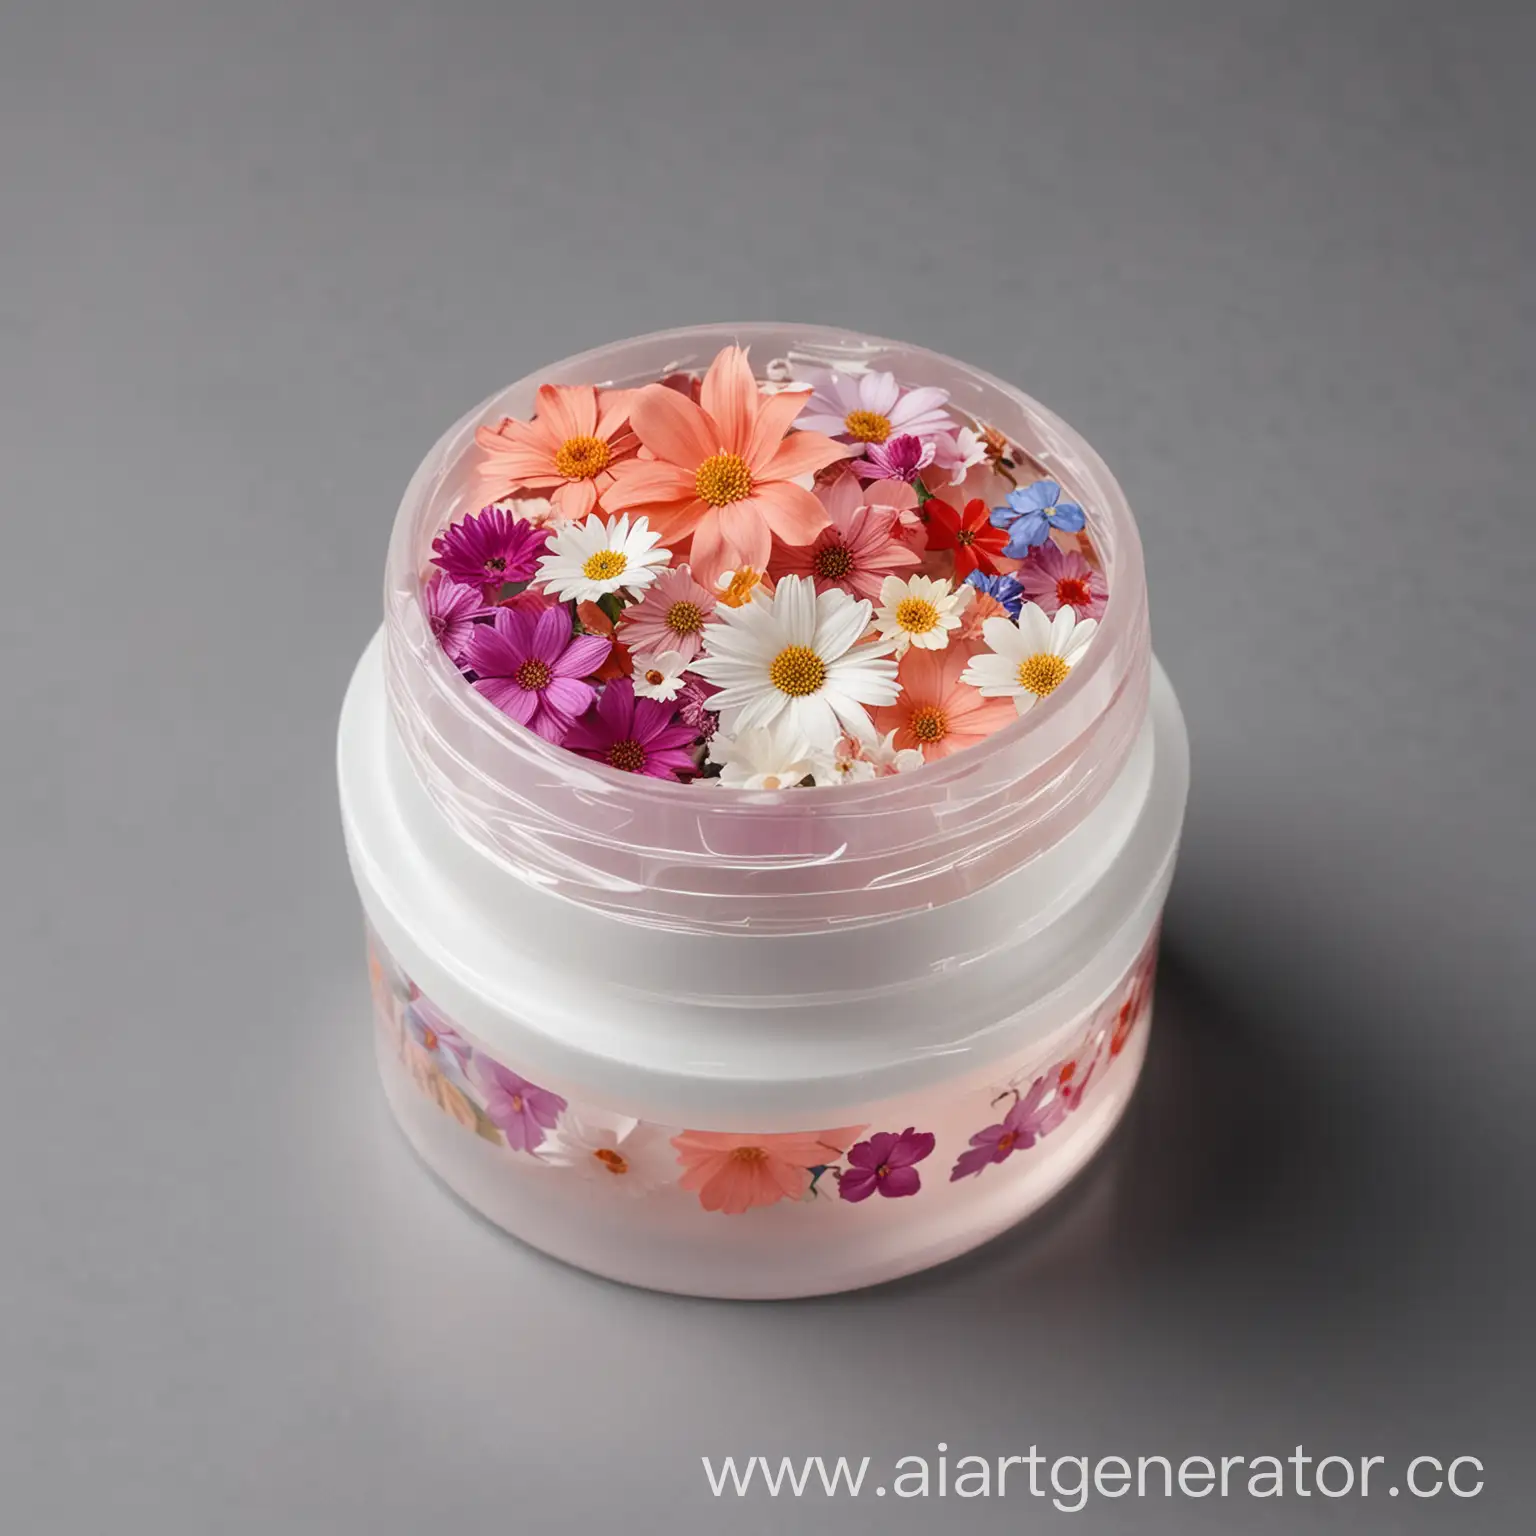 Cosmetic-Cream-in-High-ConeShaped-Translucent-Packaging-with-Multicolored-Flower-Pattern